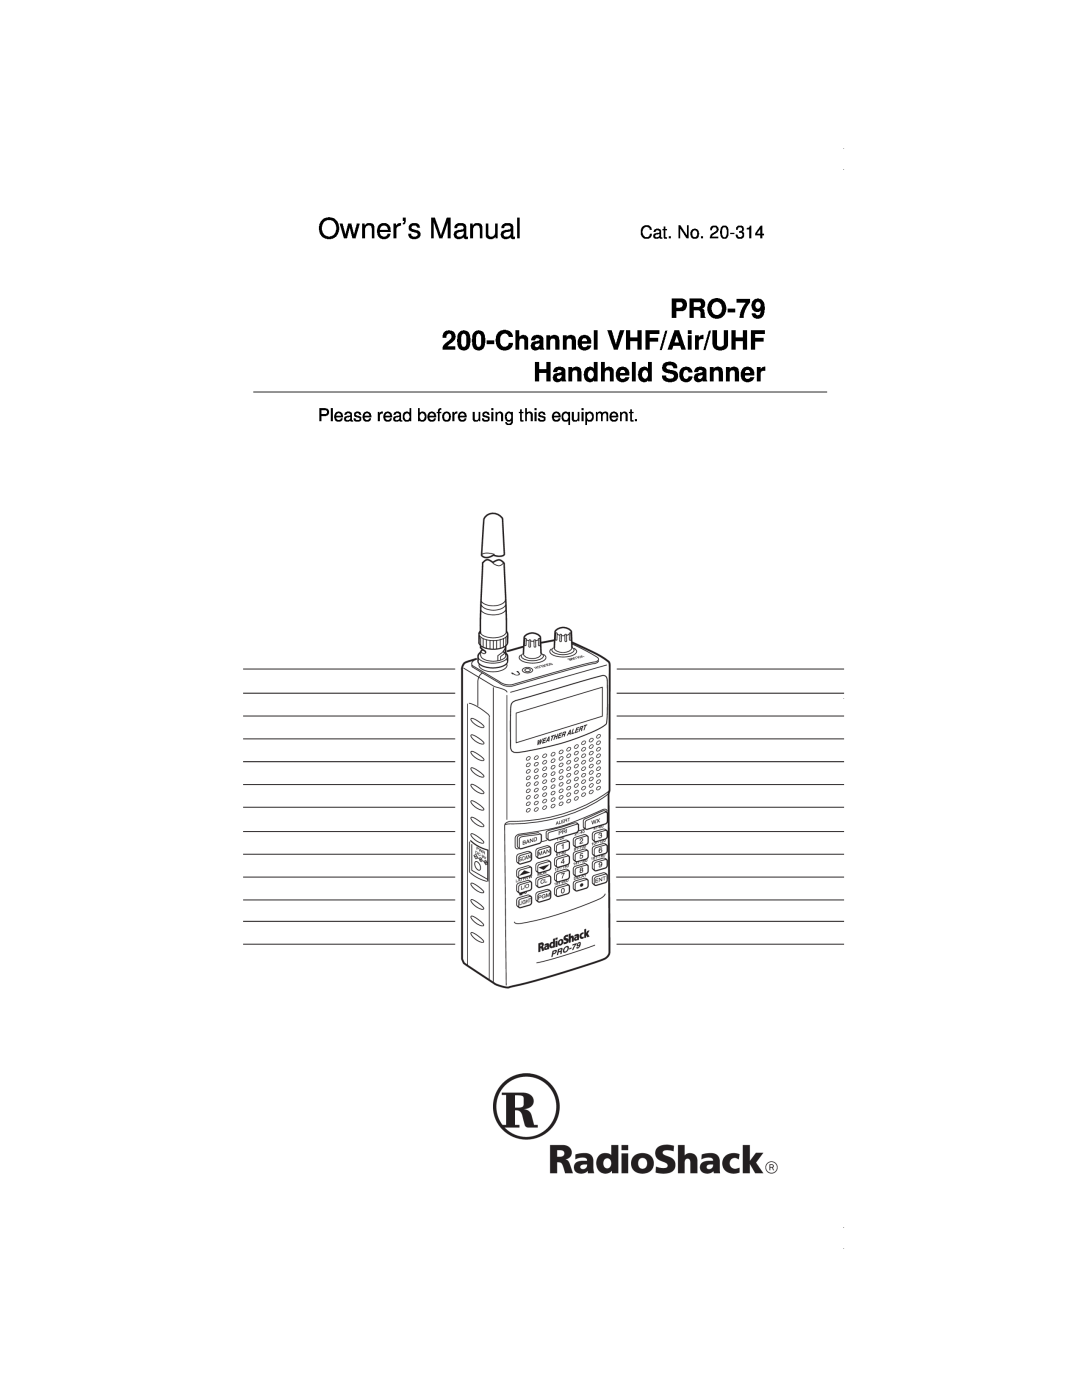 Radio Shack owner manual Owner’s Manual, PRO-79 200-Channel VHF/Air/UHF Handheld Scanner, illus - show front of product 